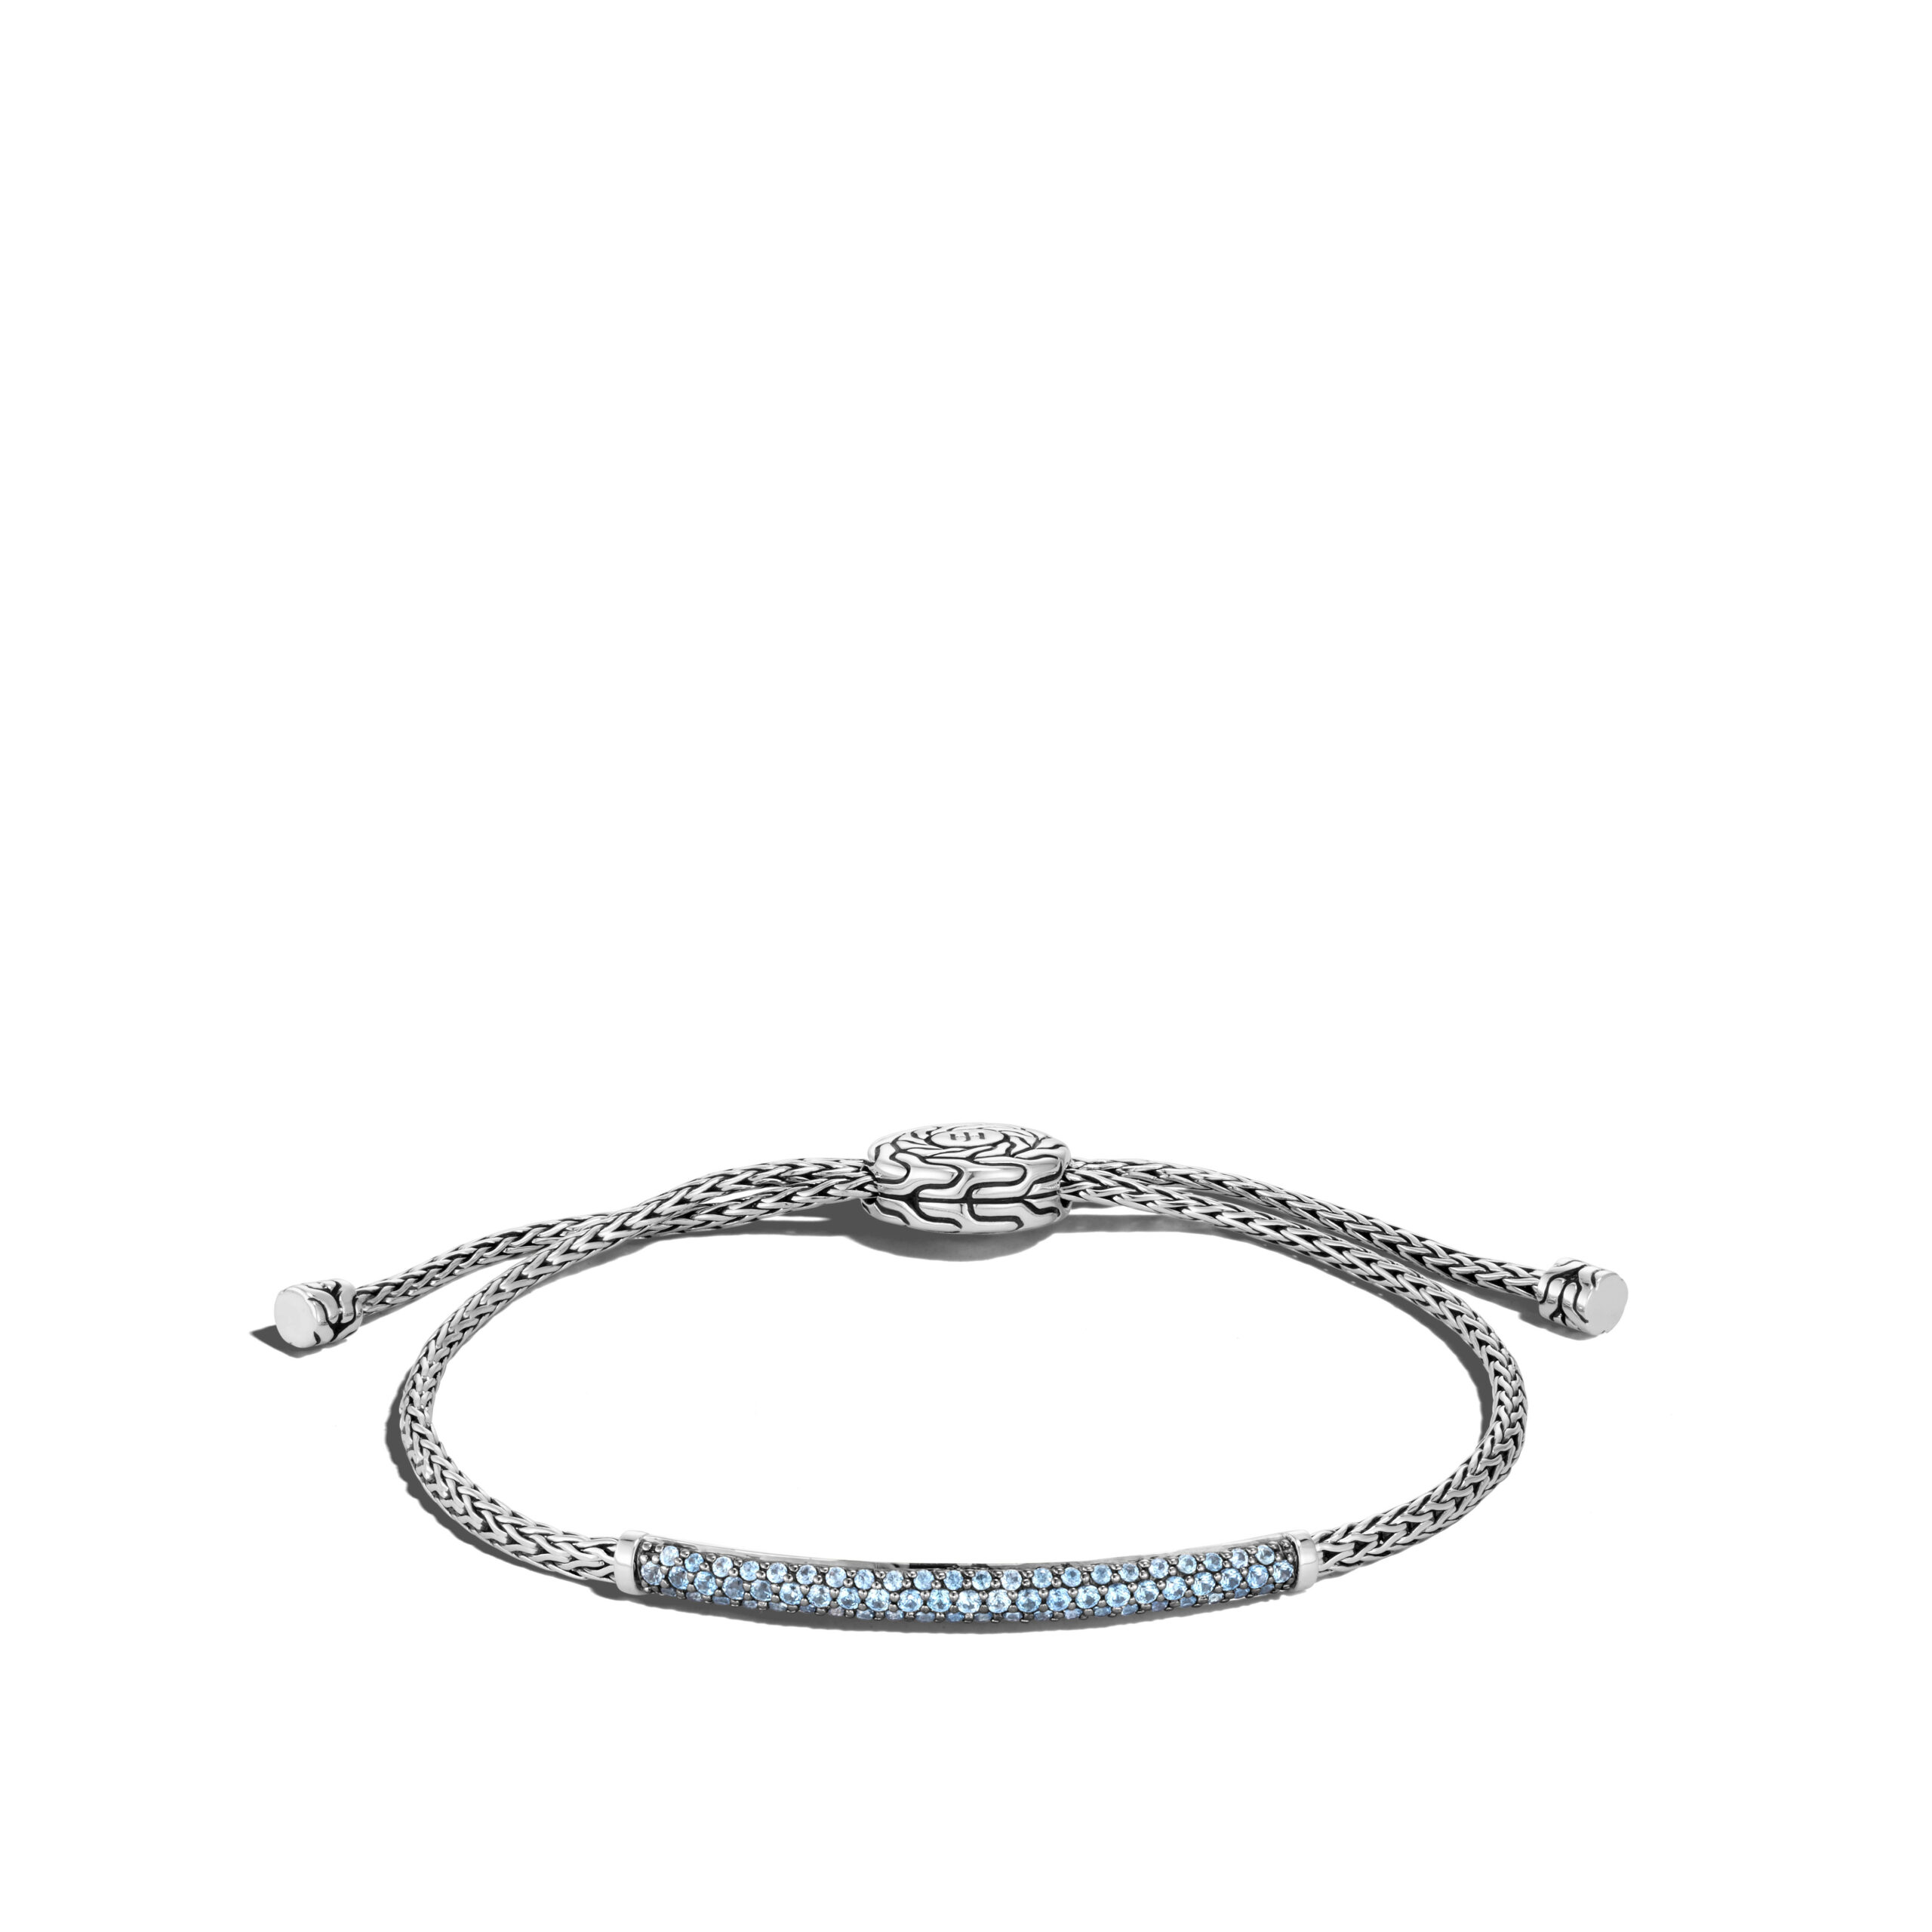 This bracelet by John Hardy is crafted from sterling silver and features swiss blue topaz.